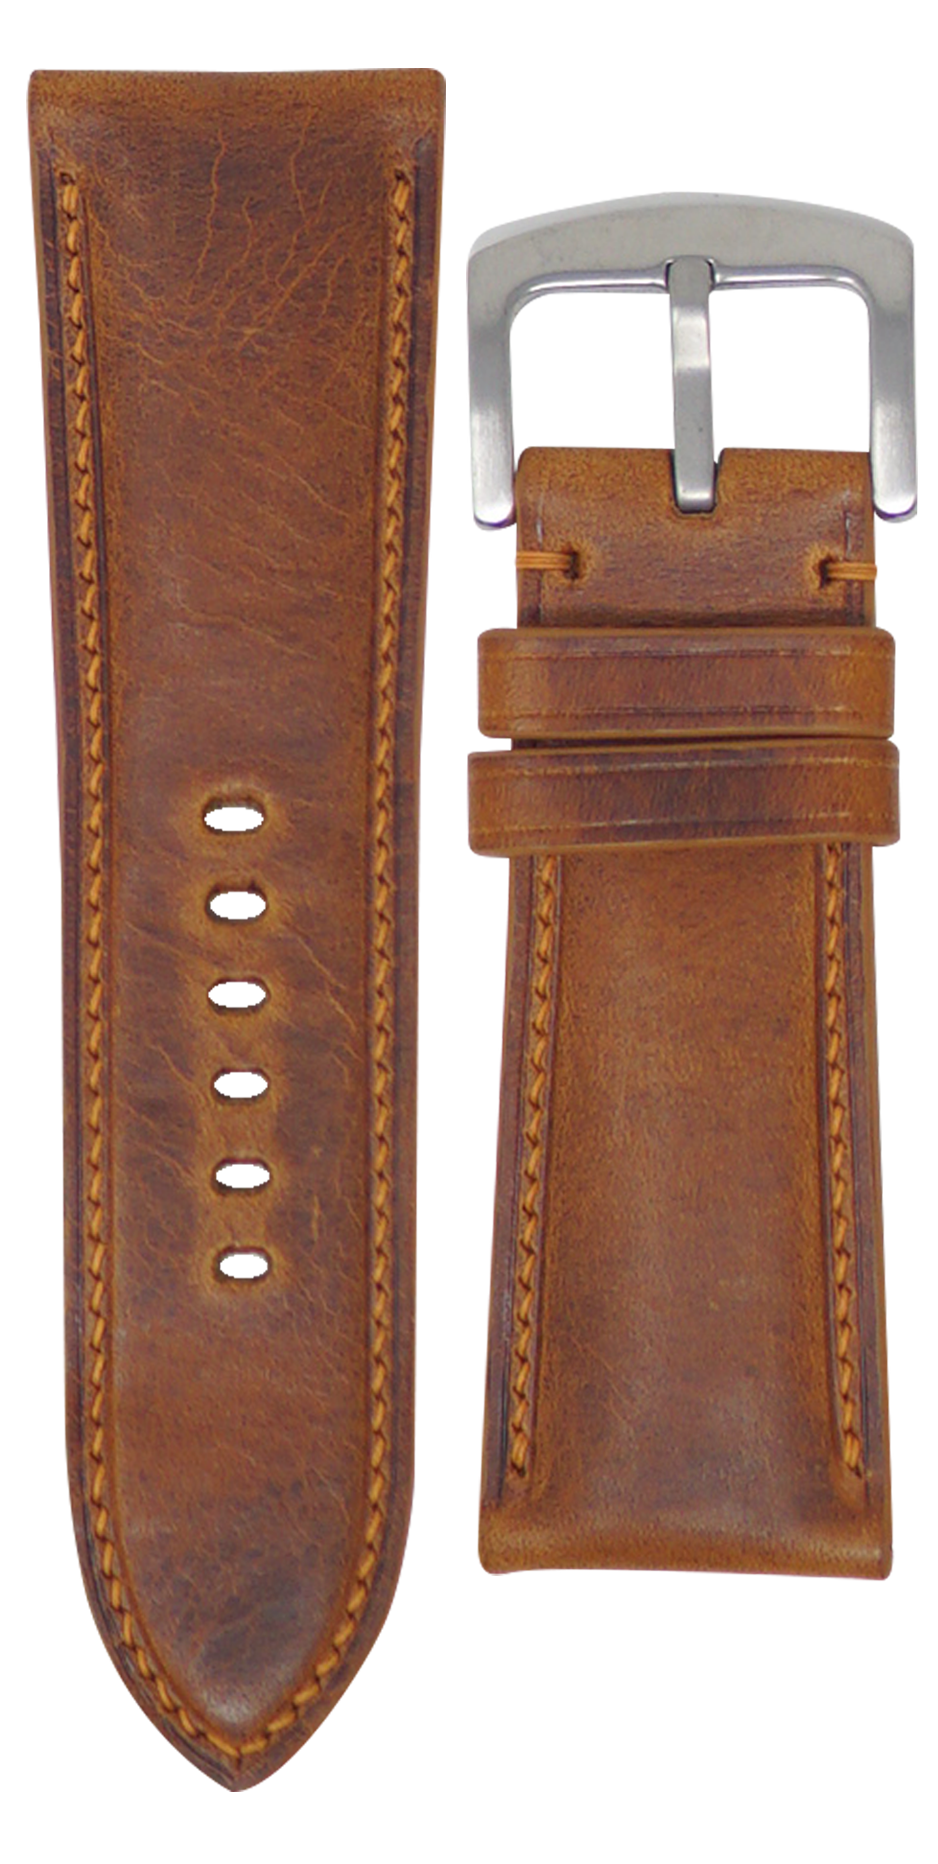 27mm watch strap - quick release